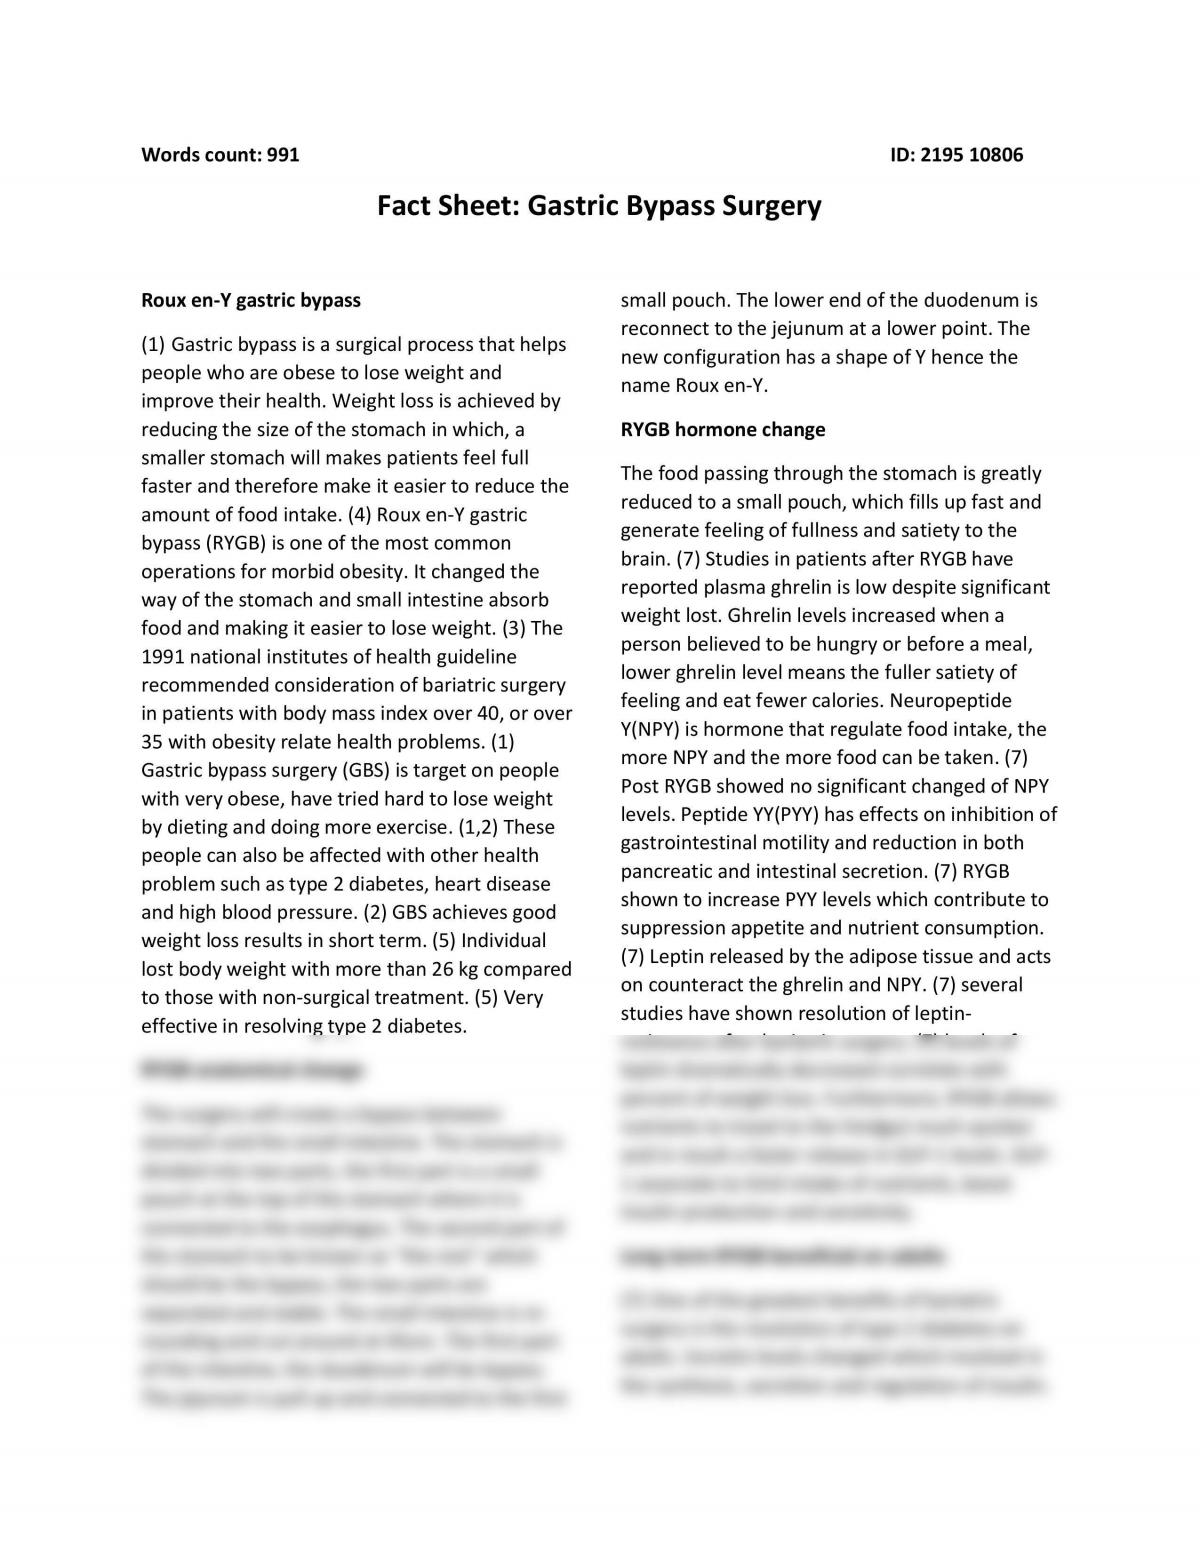 Gastric bypass surgery - Page 1